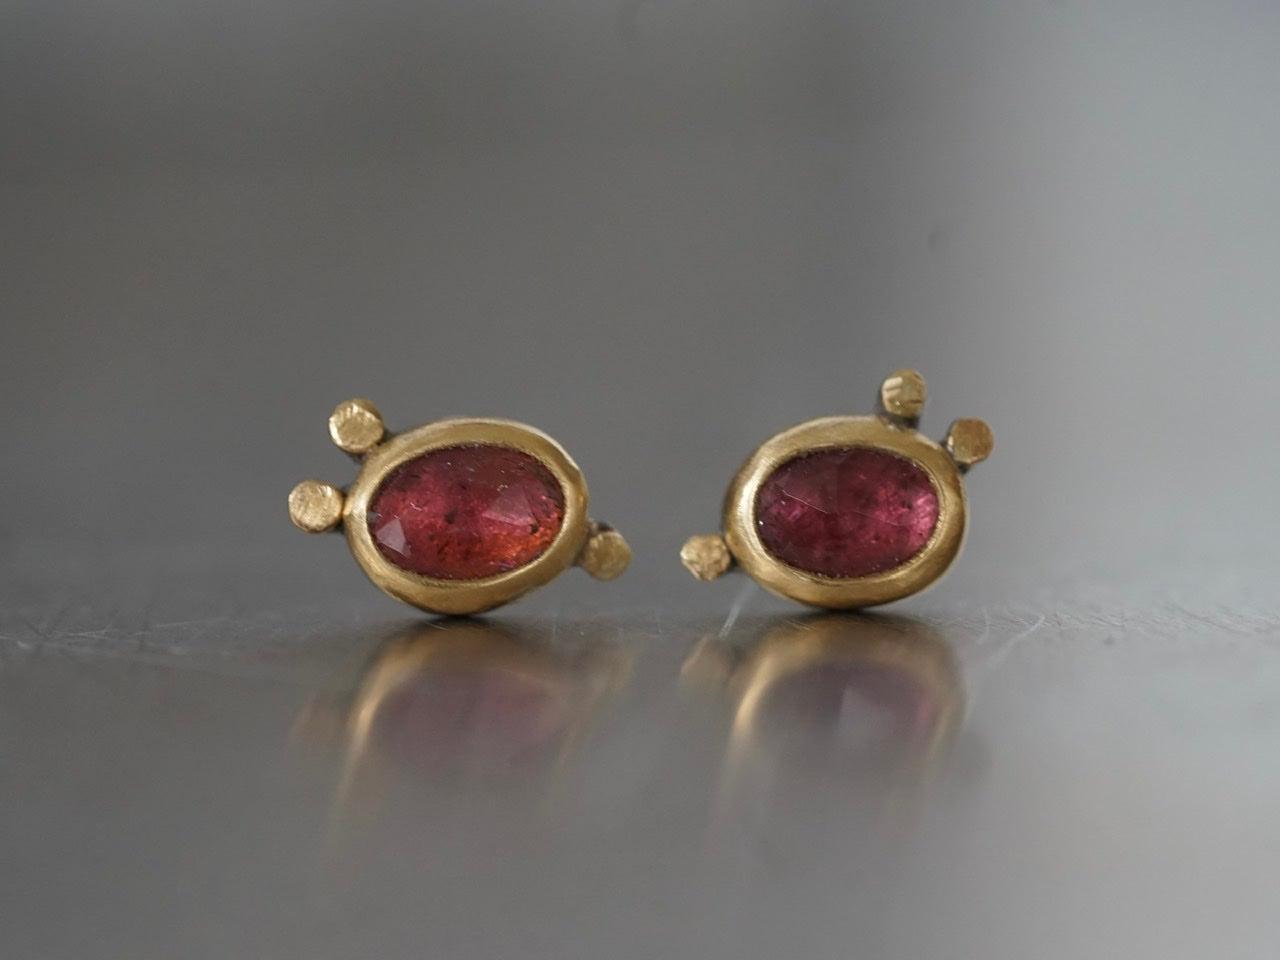 Rose cut pink tourmaline and 22k gold post earrings